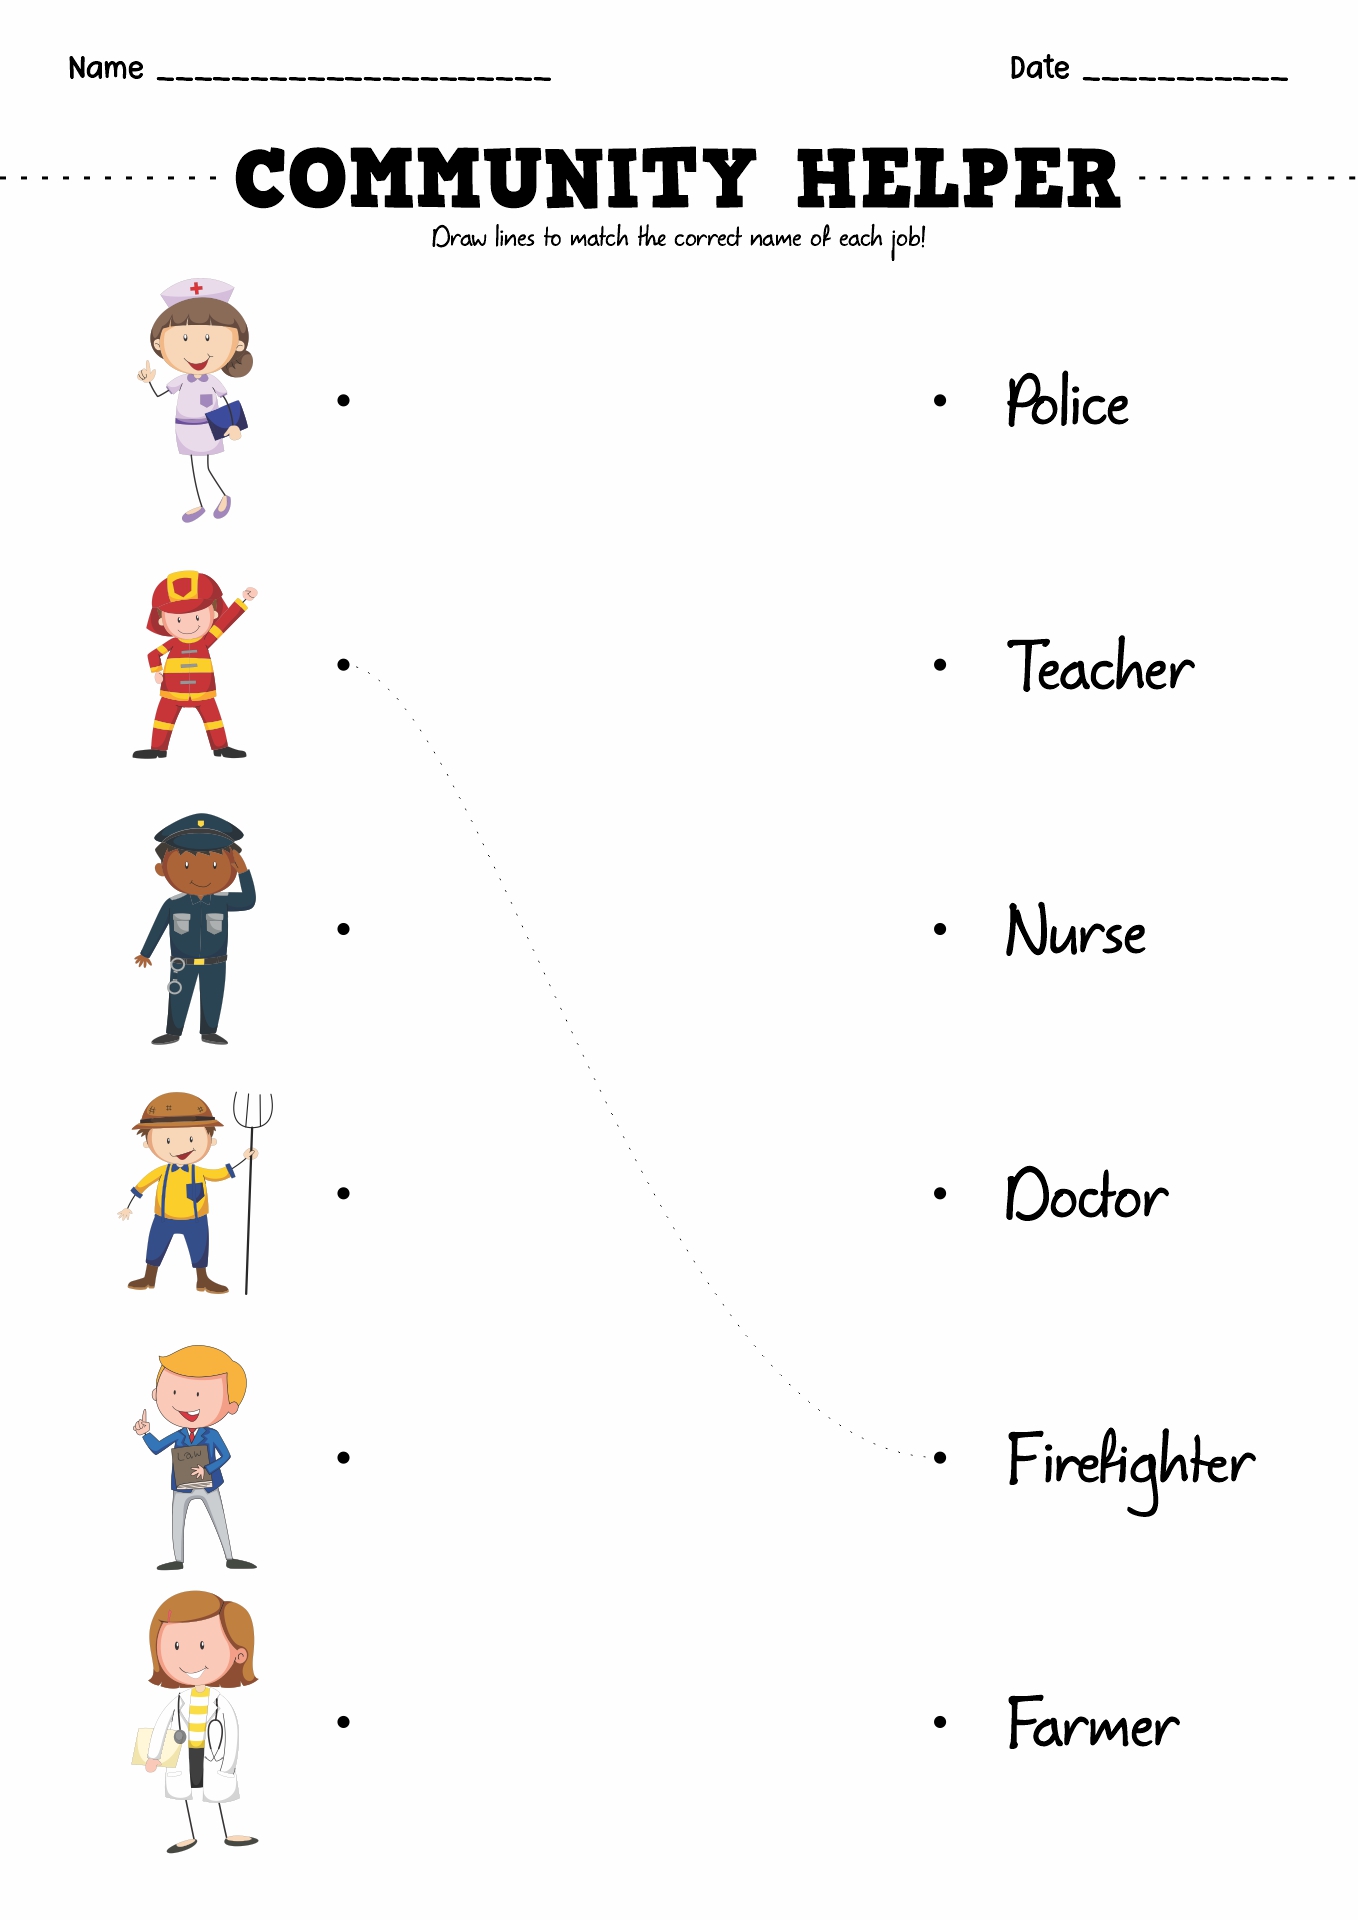 14 Best Images of Jobs Occupations For Kids Worksheets - Community